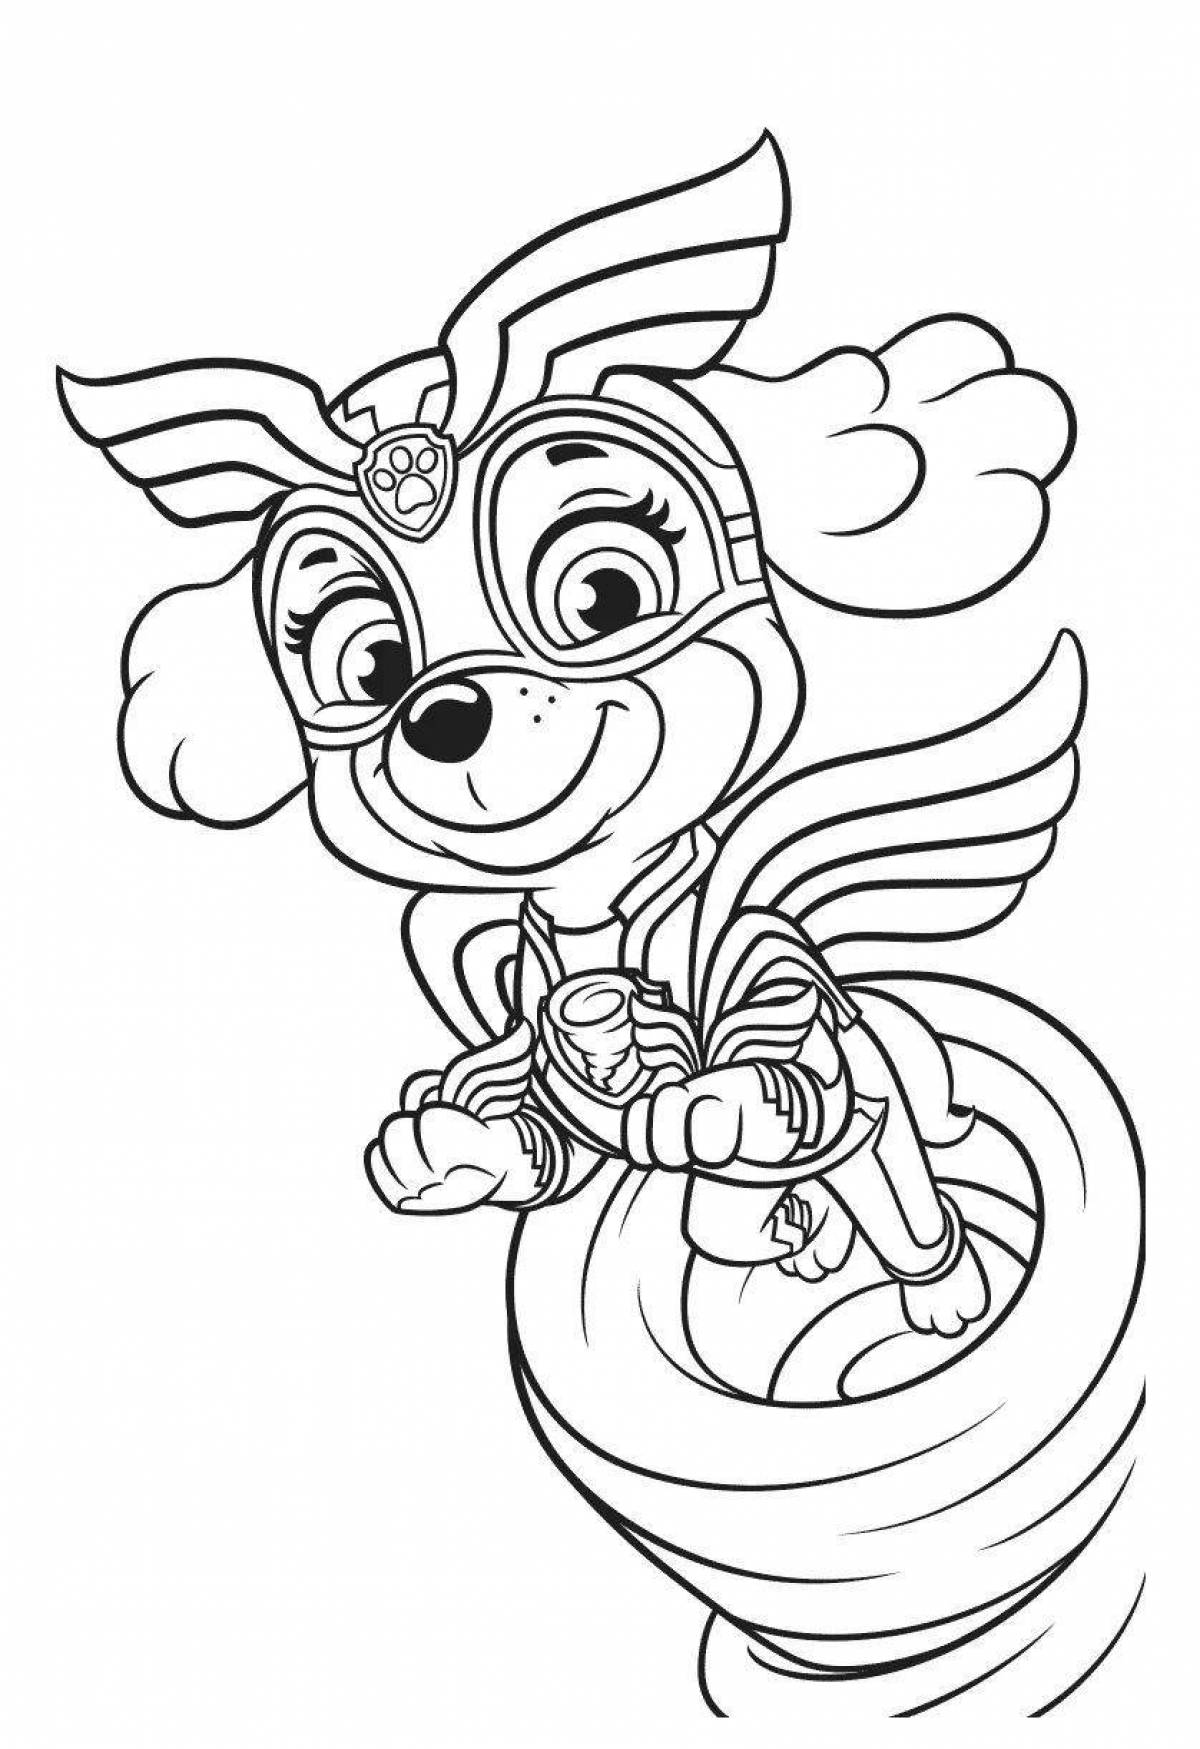 Friendly coloring wild cat paw patrol